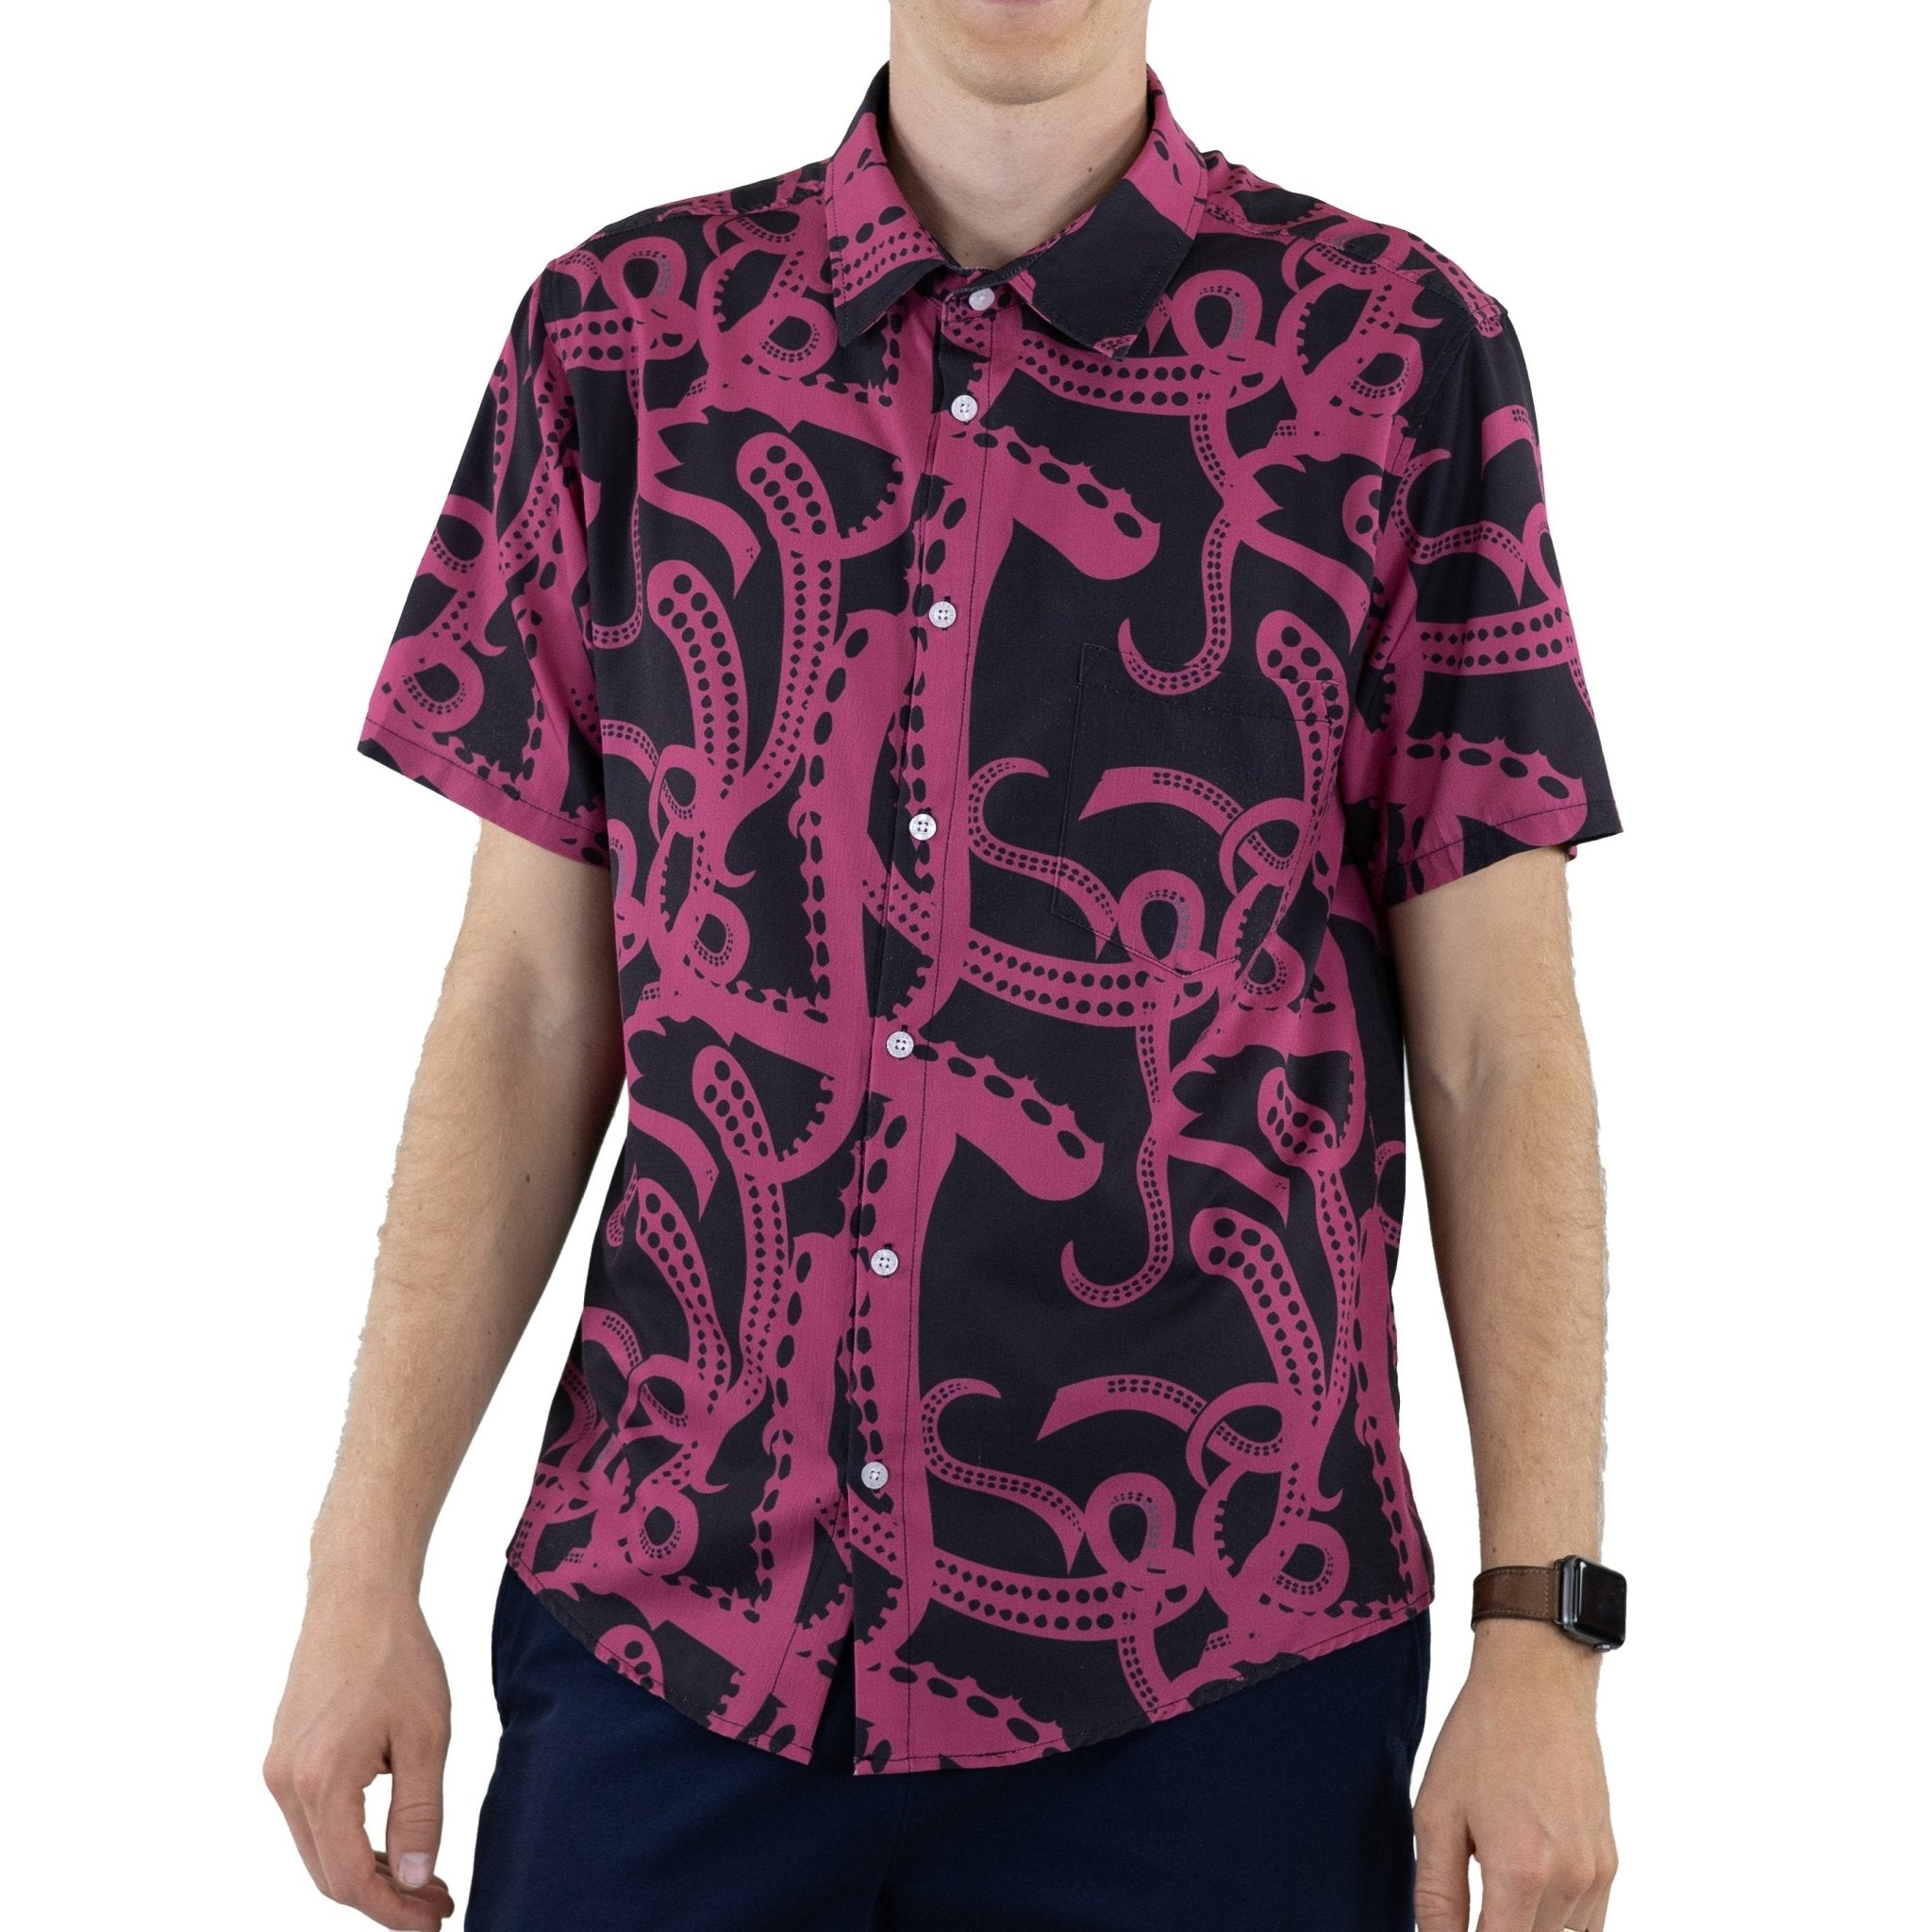 Ready-to-Ship Tentacles of Cthulhu Button Up Shirt - adult sizing - Design by Heather Davenport - Fantasy Prints